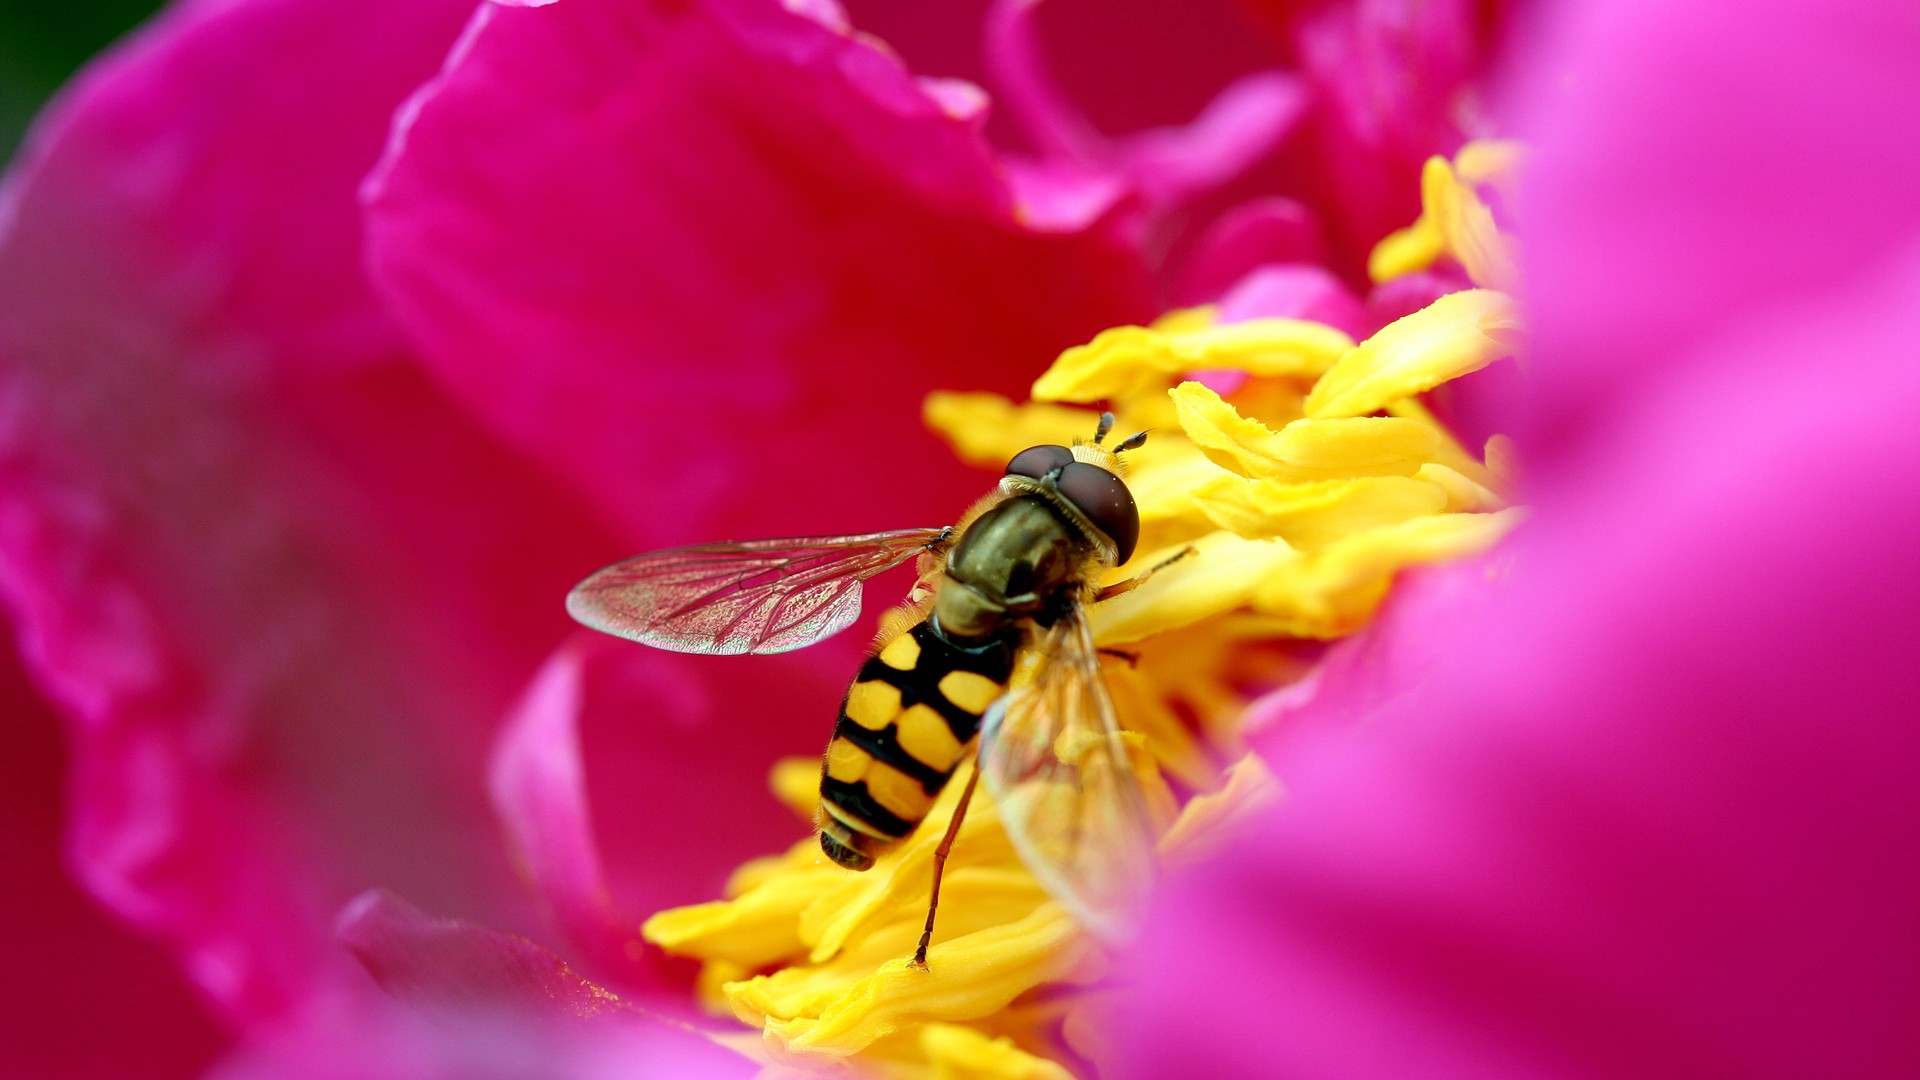 General 1920x1080 nature flowers macro pink yellow red hoverfly insect animals plants